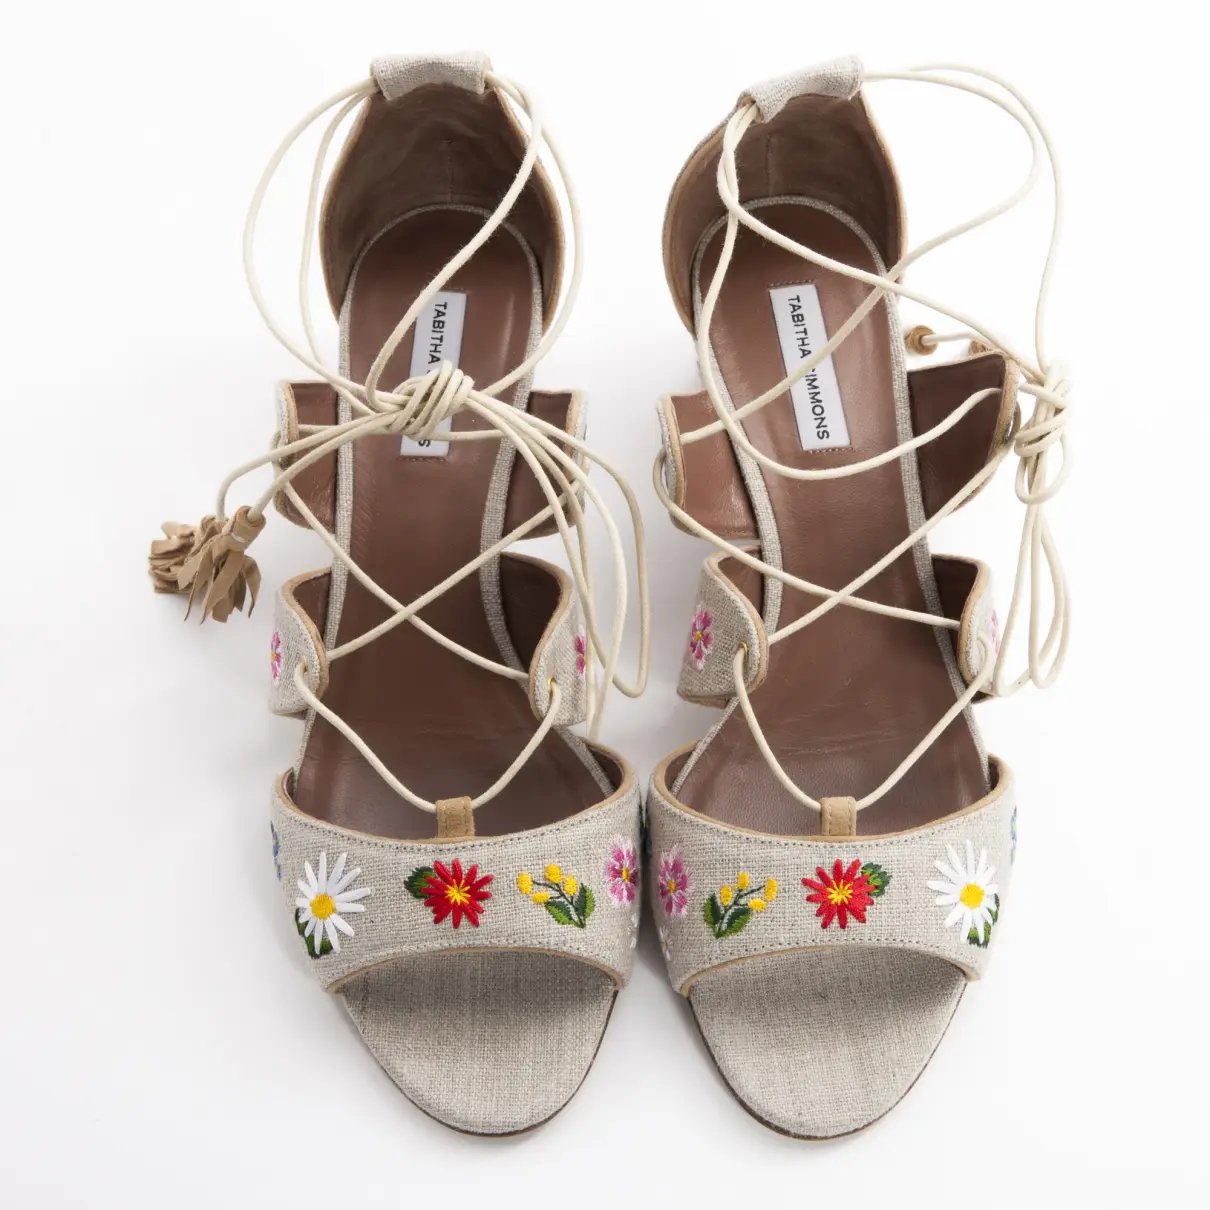 Buy Tabitha Simmons Cloth sandals online